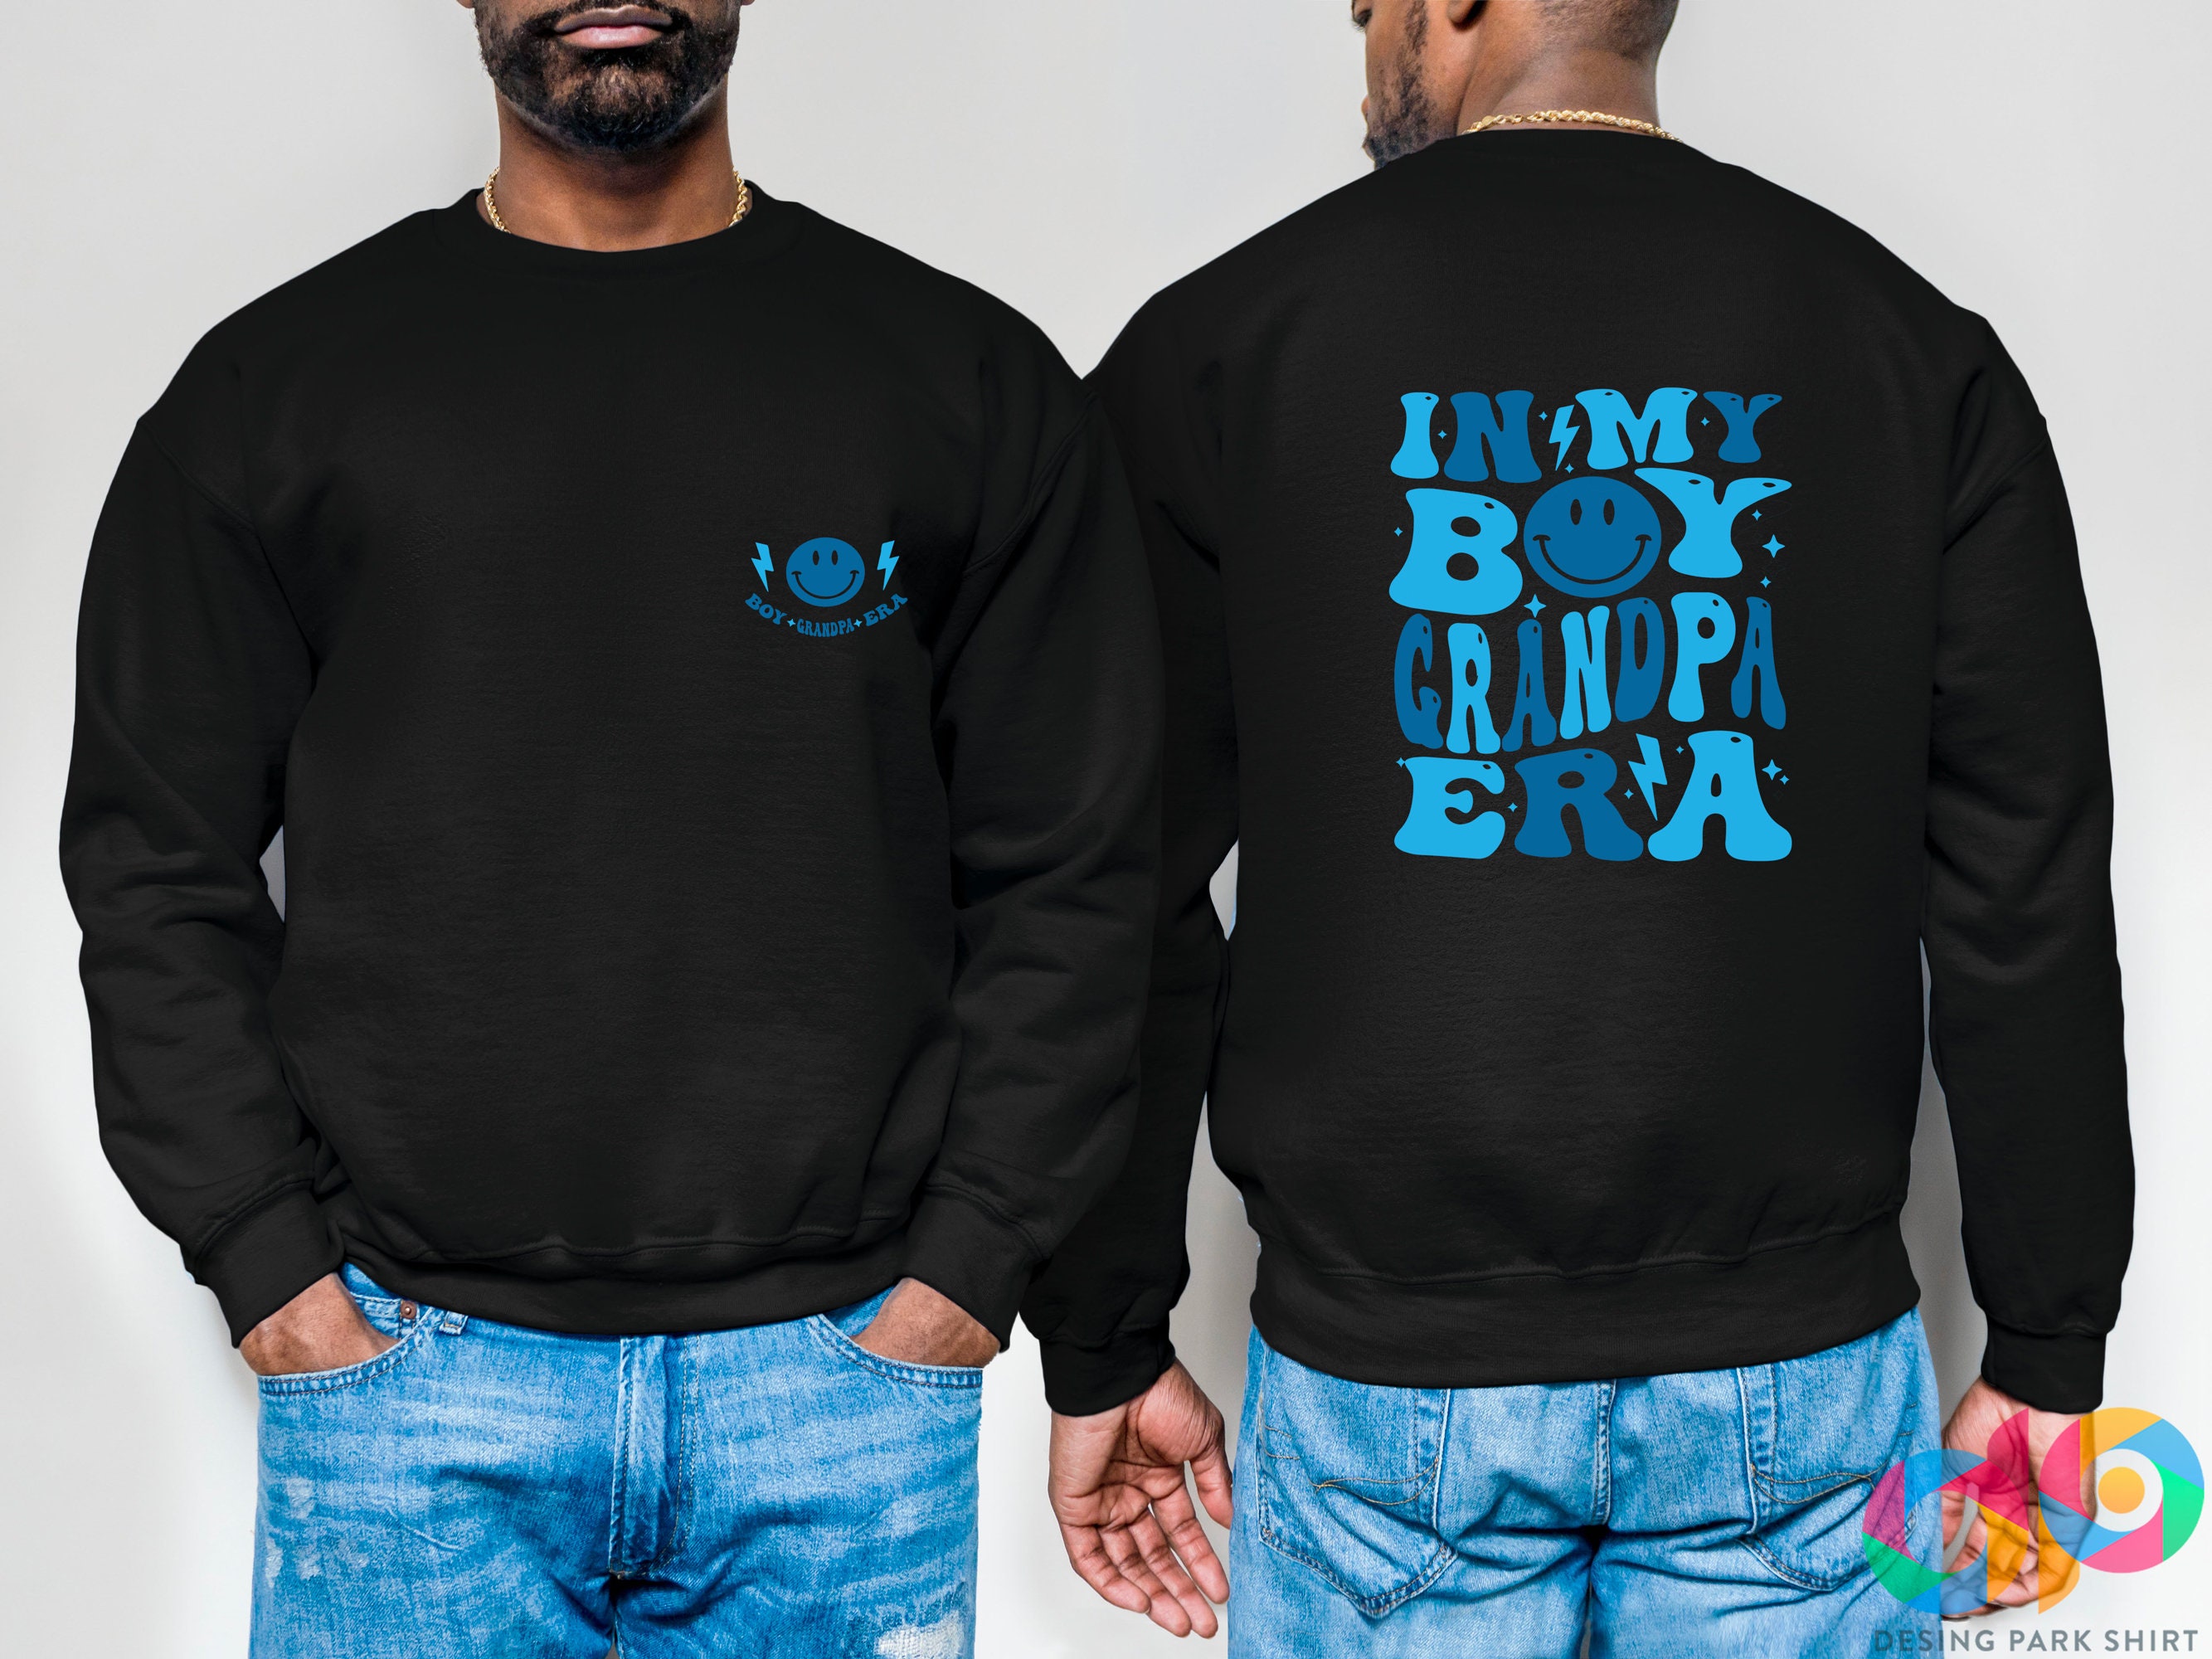 Discover In My Boy Grandpa Era Double Sided Sweatshirts, Fathers Day Gift